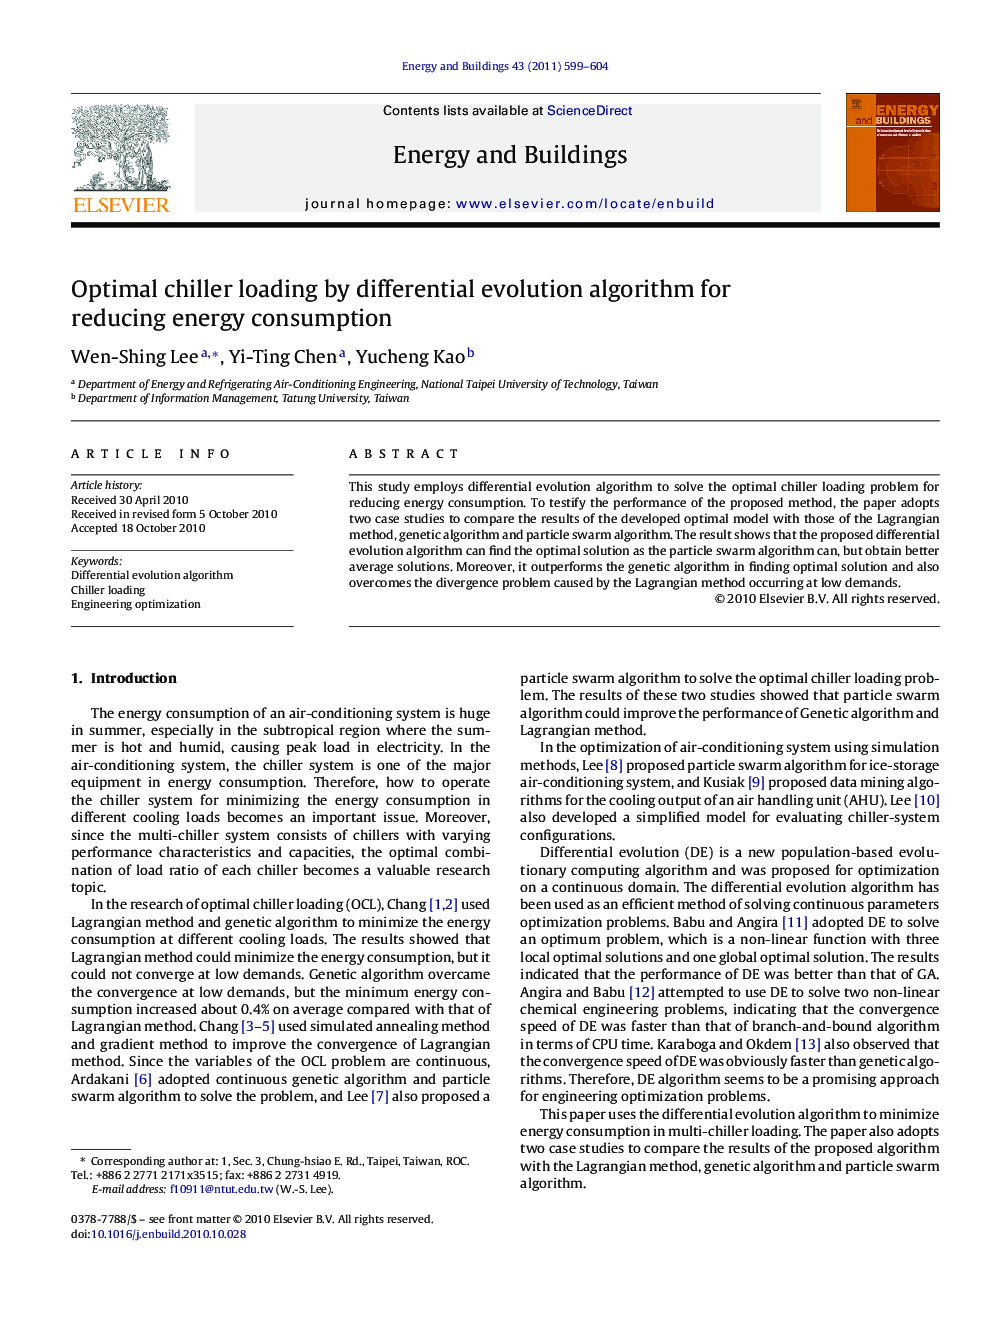 Optimal chiller loading by differential evolution algorithm for reducing energy consumption